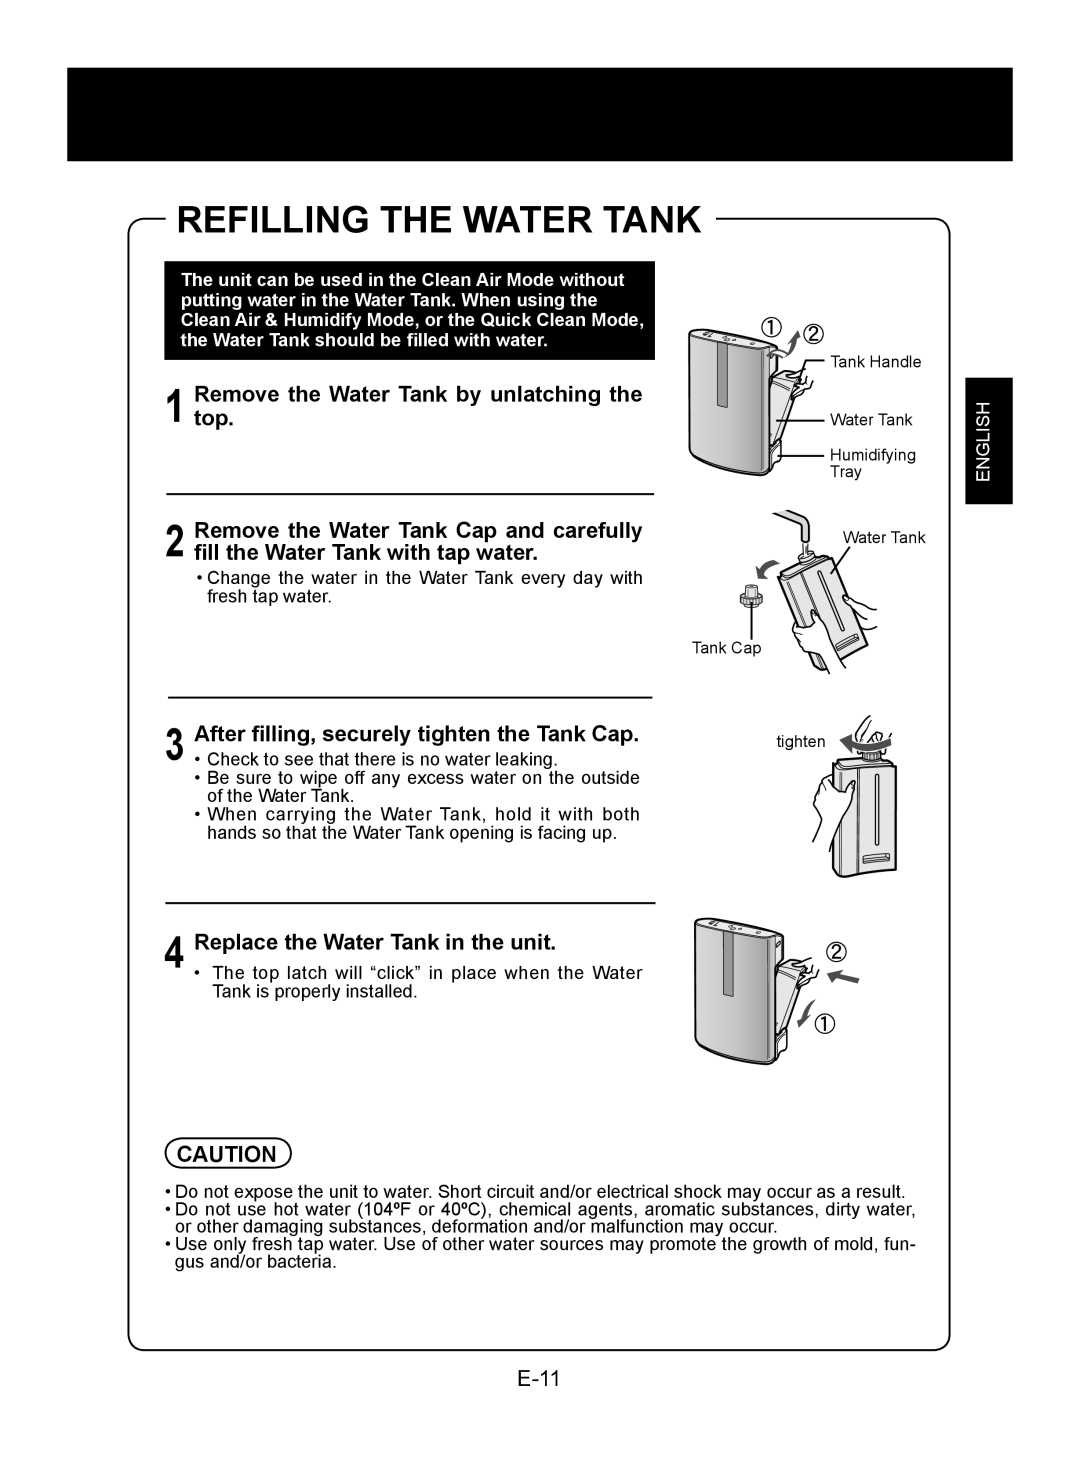 Sharp KC-850U Refilling The Water Tank, Removetop. the Water Tank by unlatching the, 4Replace the Water Tank in the unit 